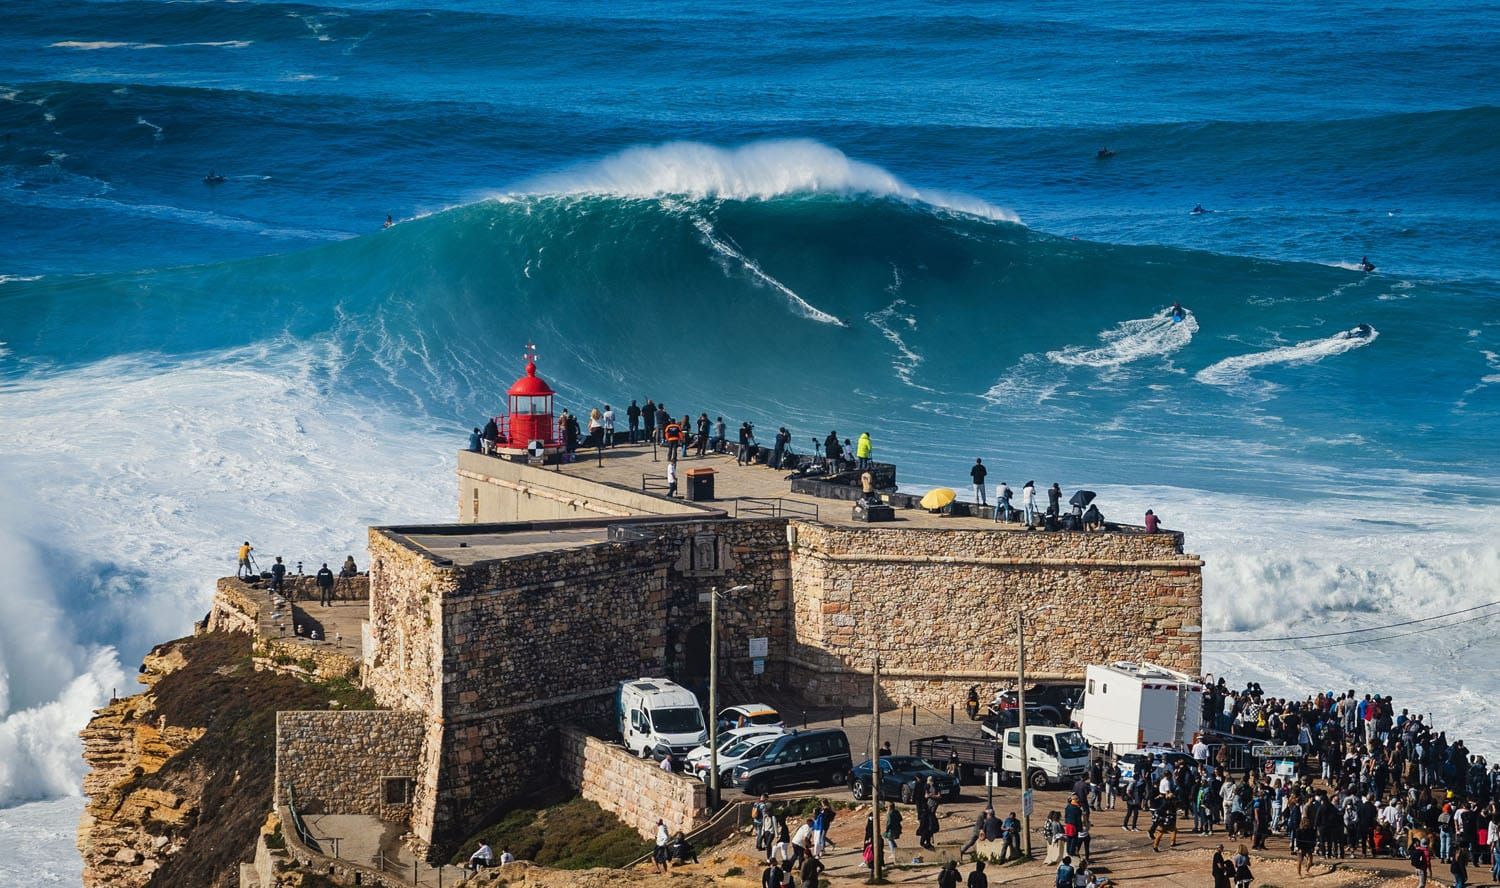 Nazare Waves | 10 Days in Portugal Itinerary